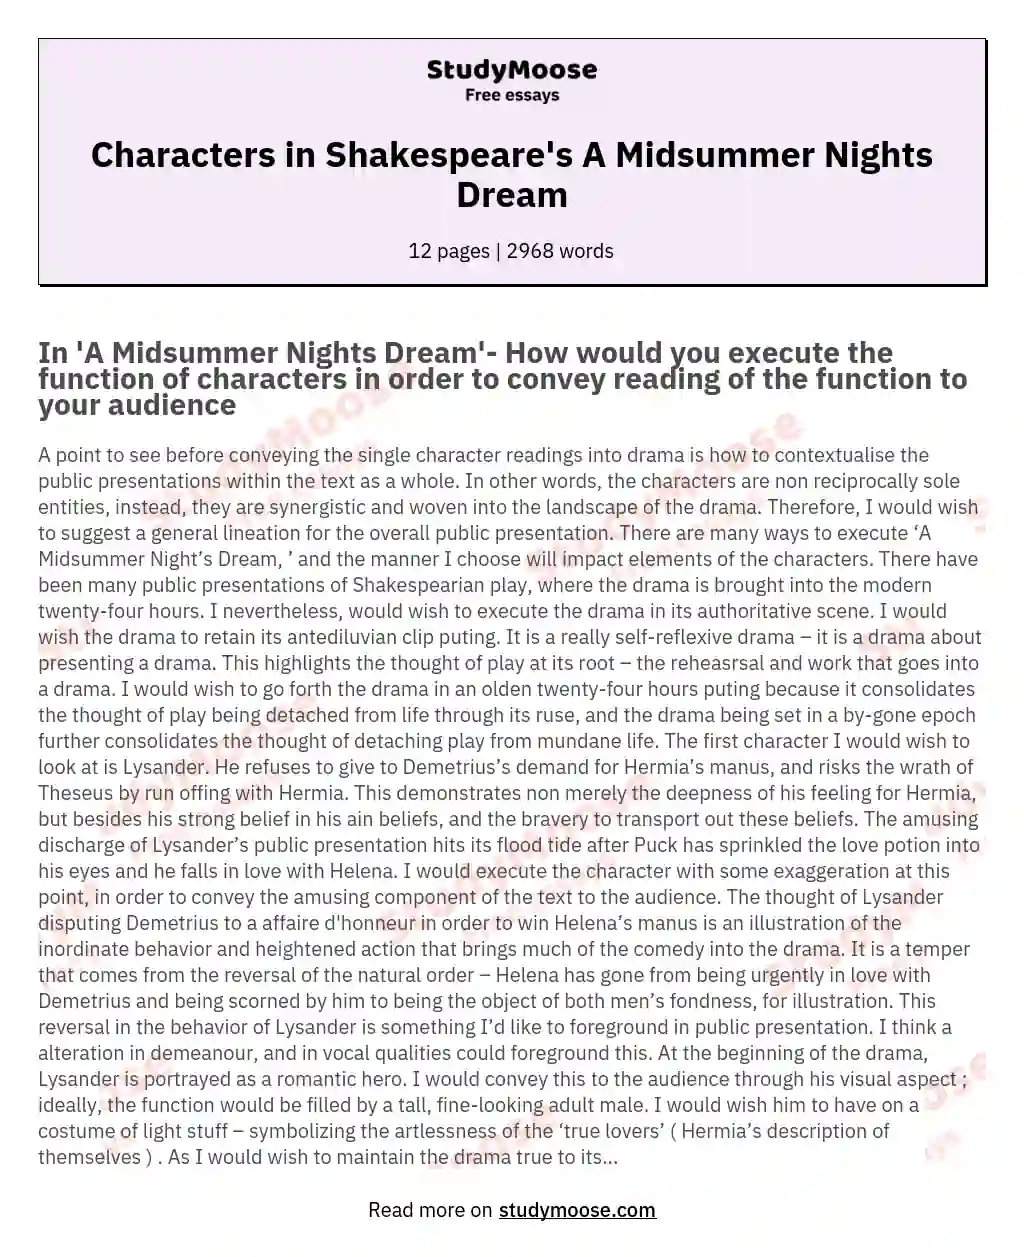 Characters in Shakespeare's A Midsummer Nights Dream